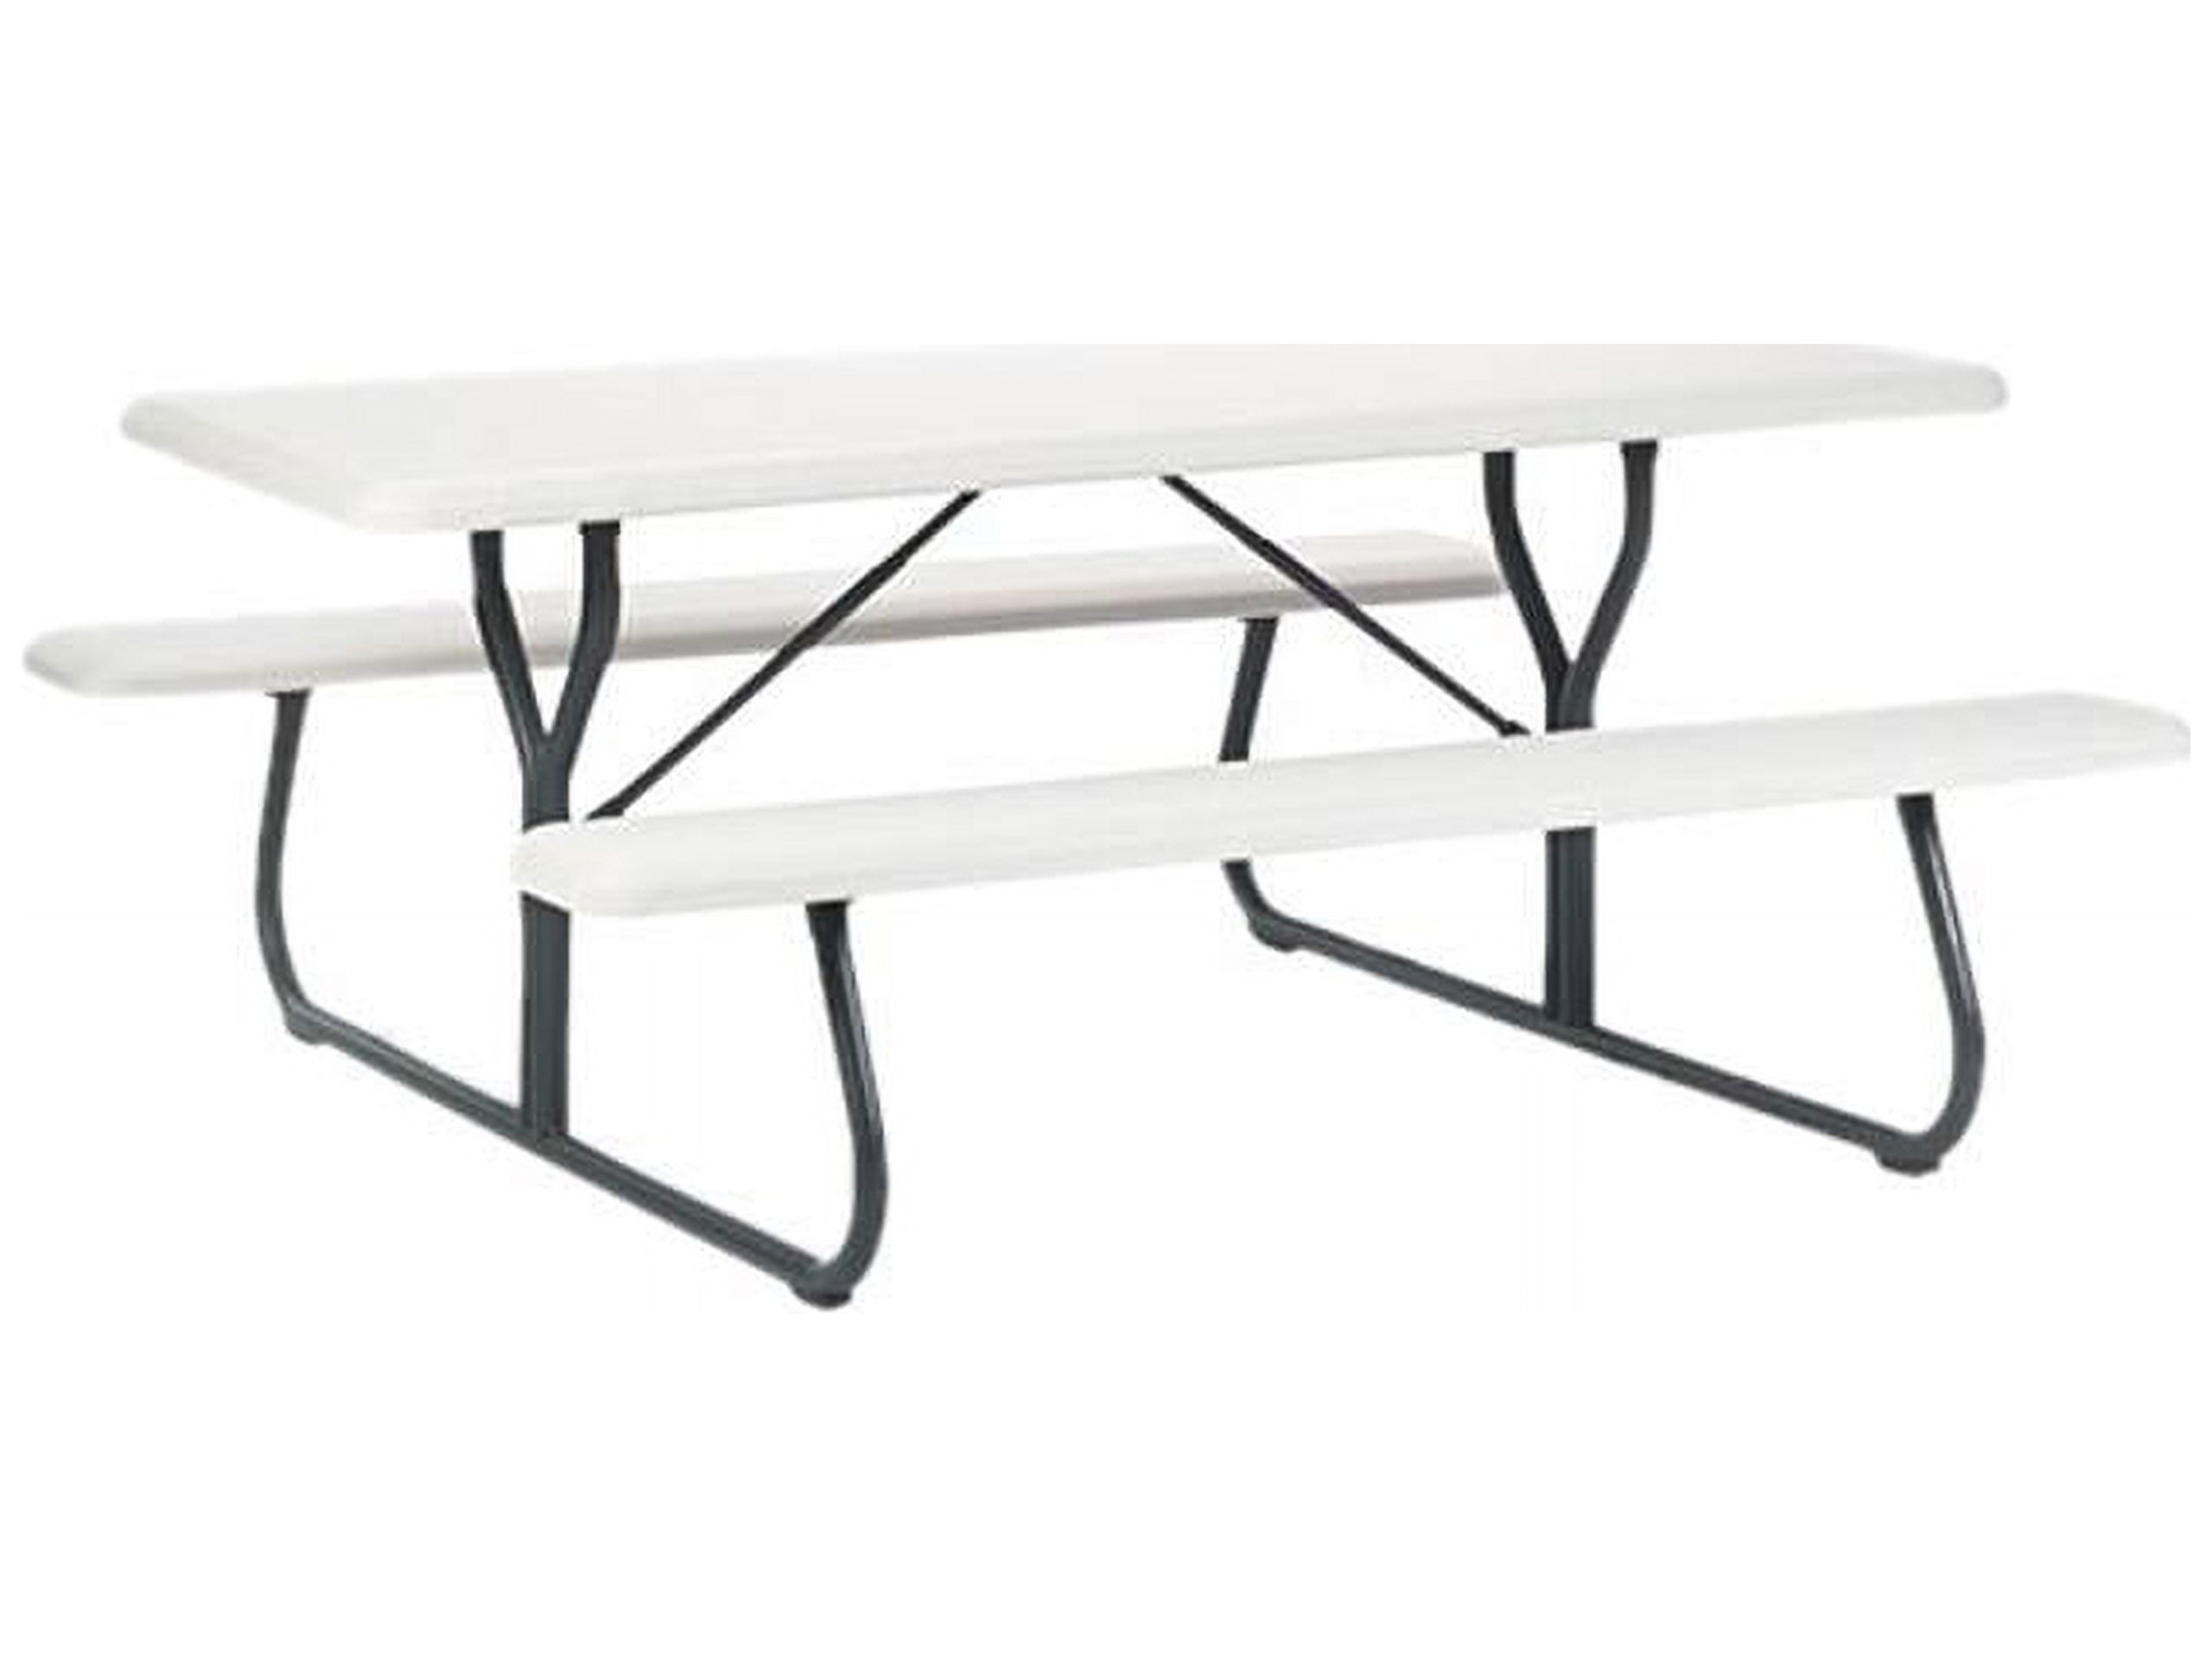 Iceberg 65923 IndestrucTable TOO 1200 Series Resin Picnic Table, 72w x 30d, Platinum - image 1 of 2